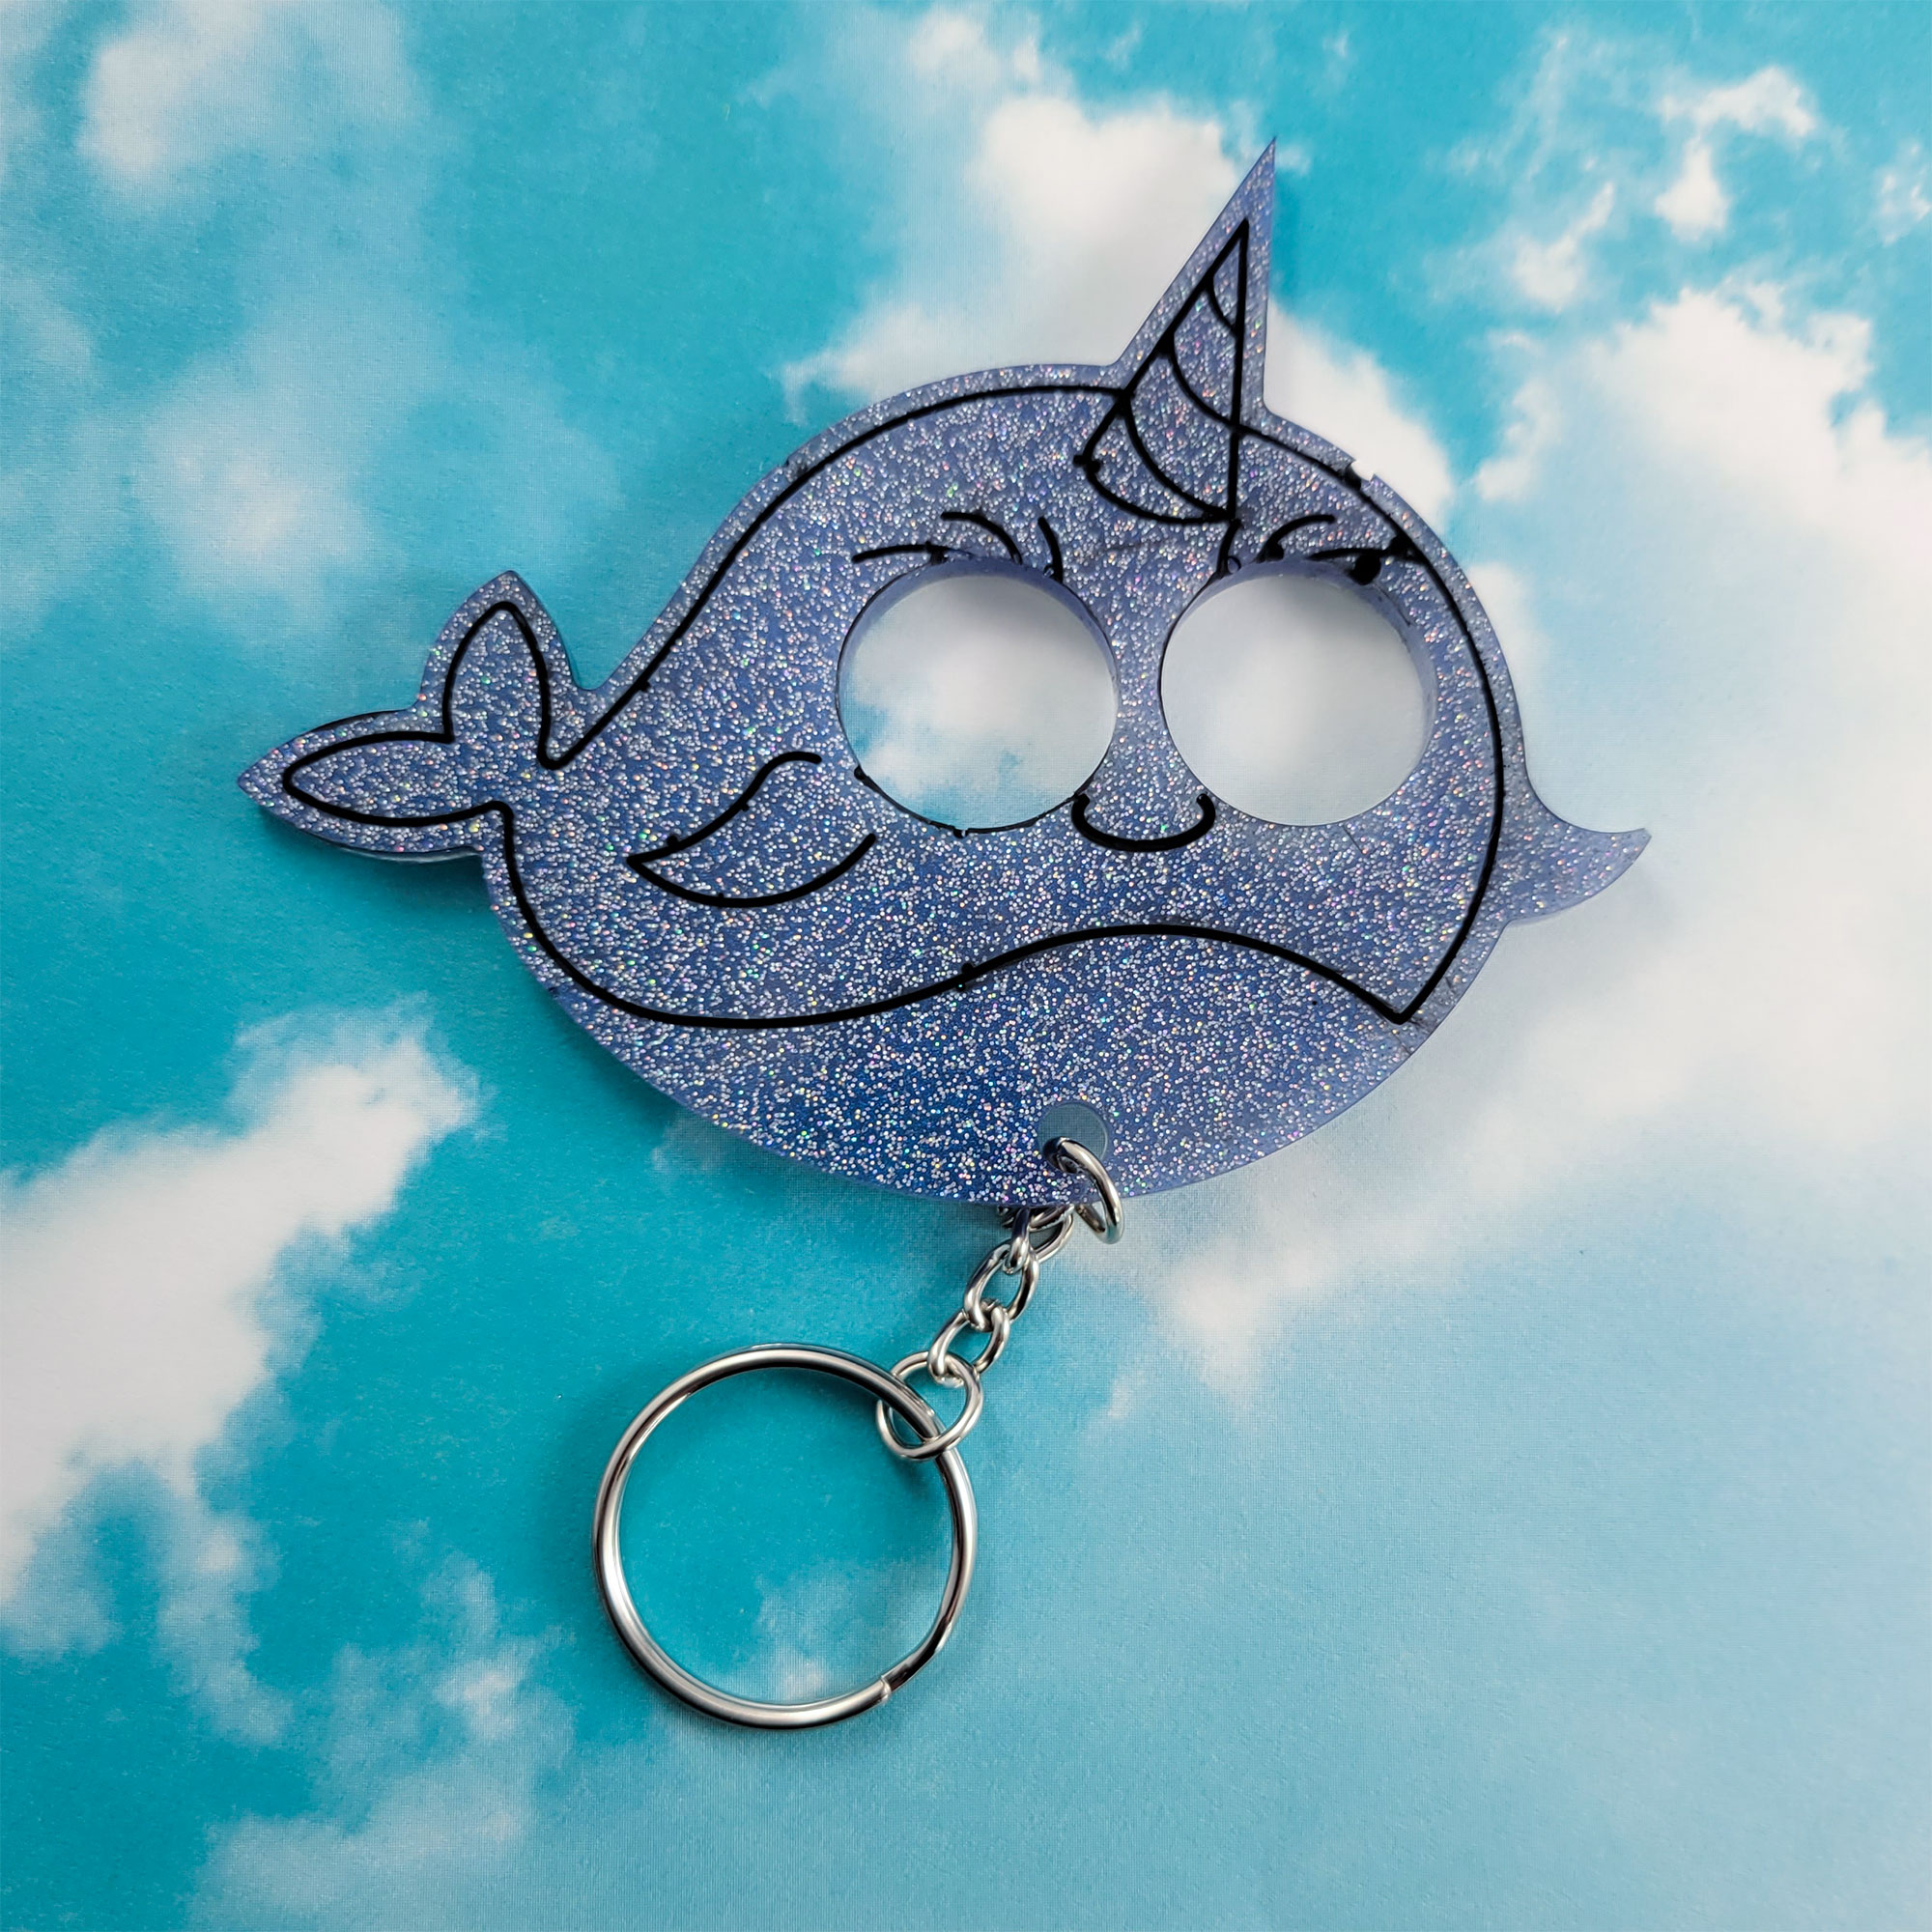 Glittery Blue Narwhal Safety Keychain by Wilde Designs